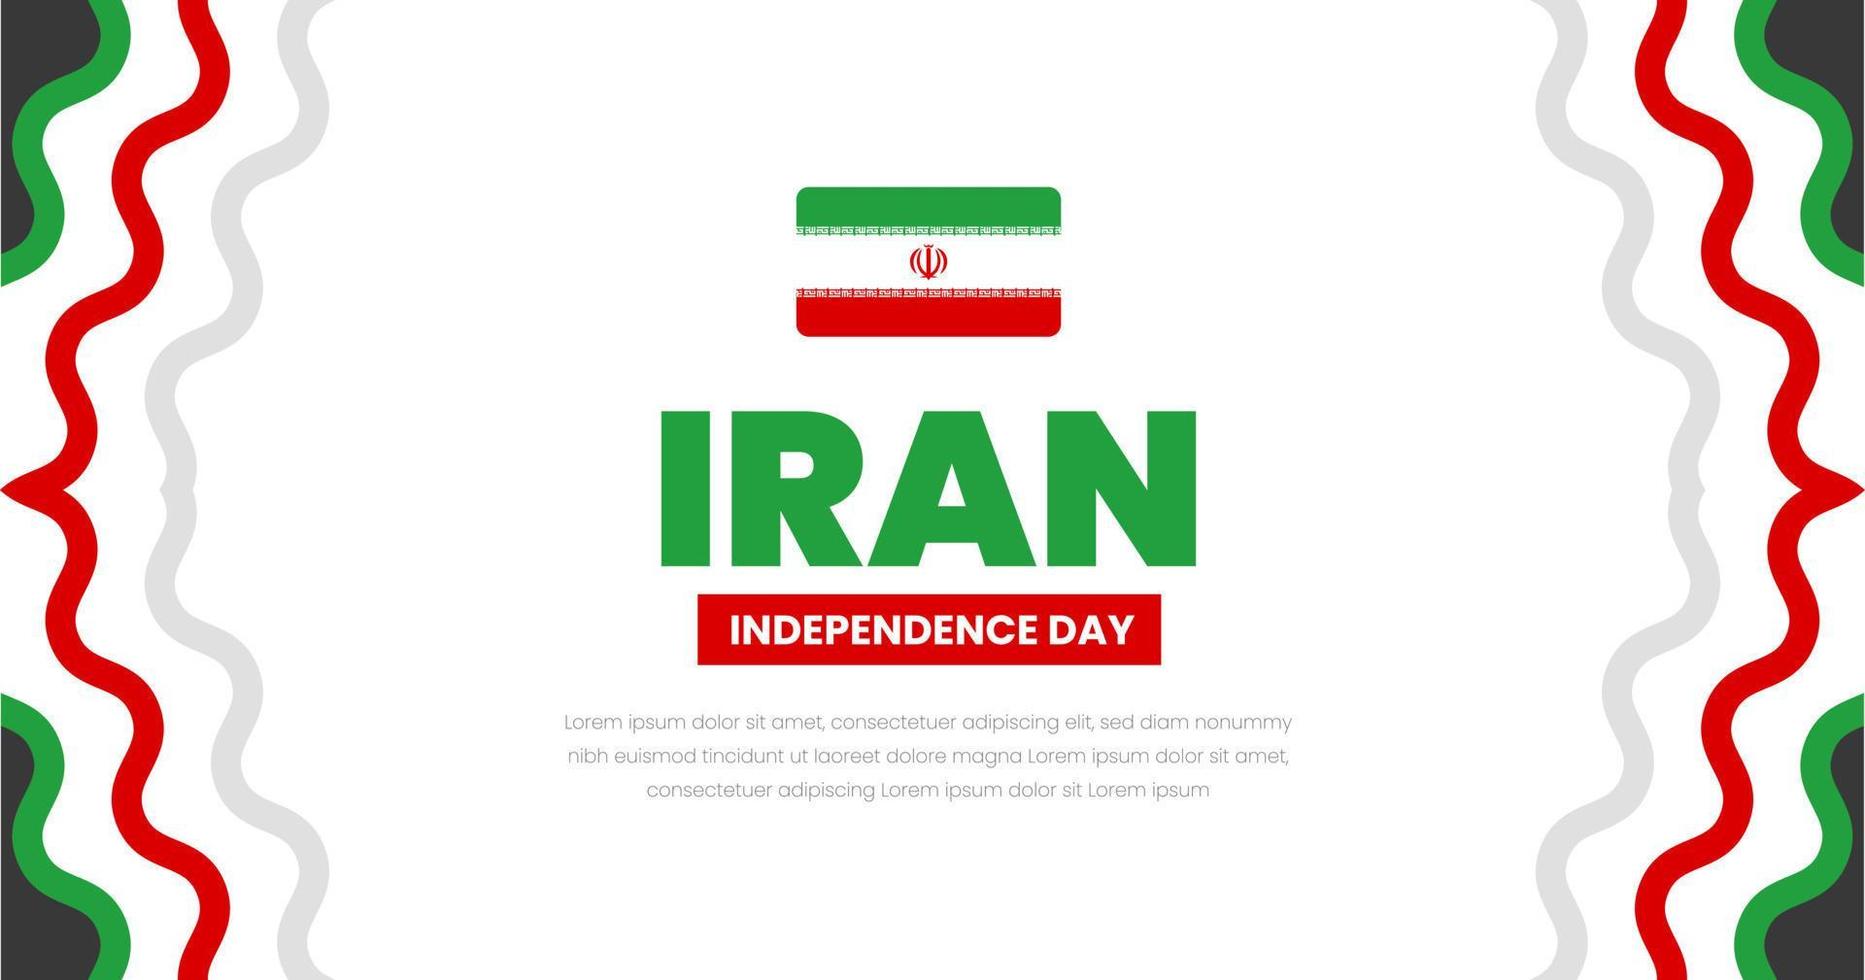 Happy Iran Independence Day Background. Islamic Republic Day 11 February Celebration Vector Design Illustration. Template for Poster, Banner, Advertising, Greeting Card, banner, Print Design Element.